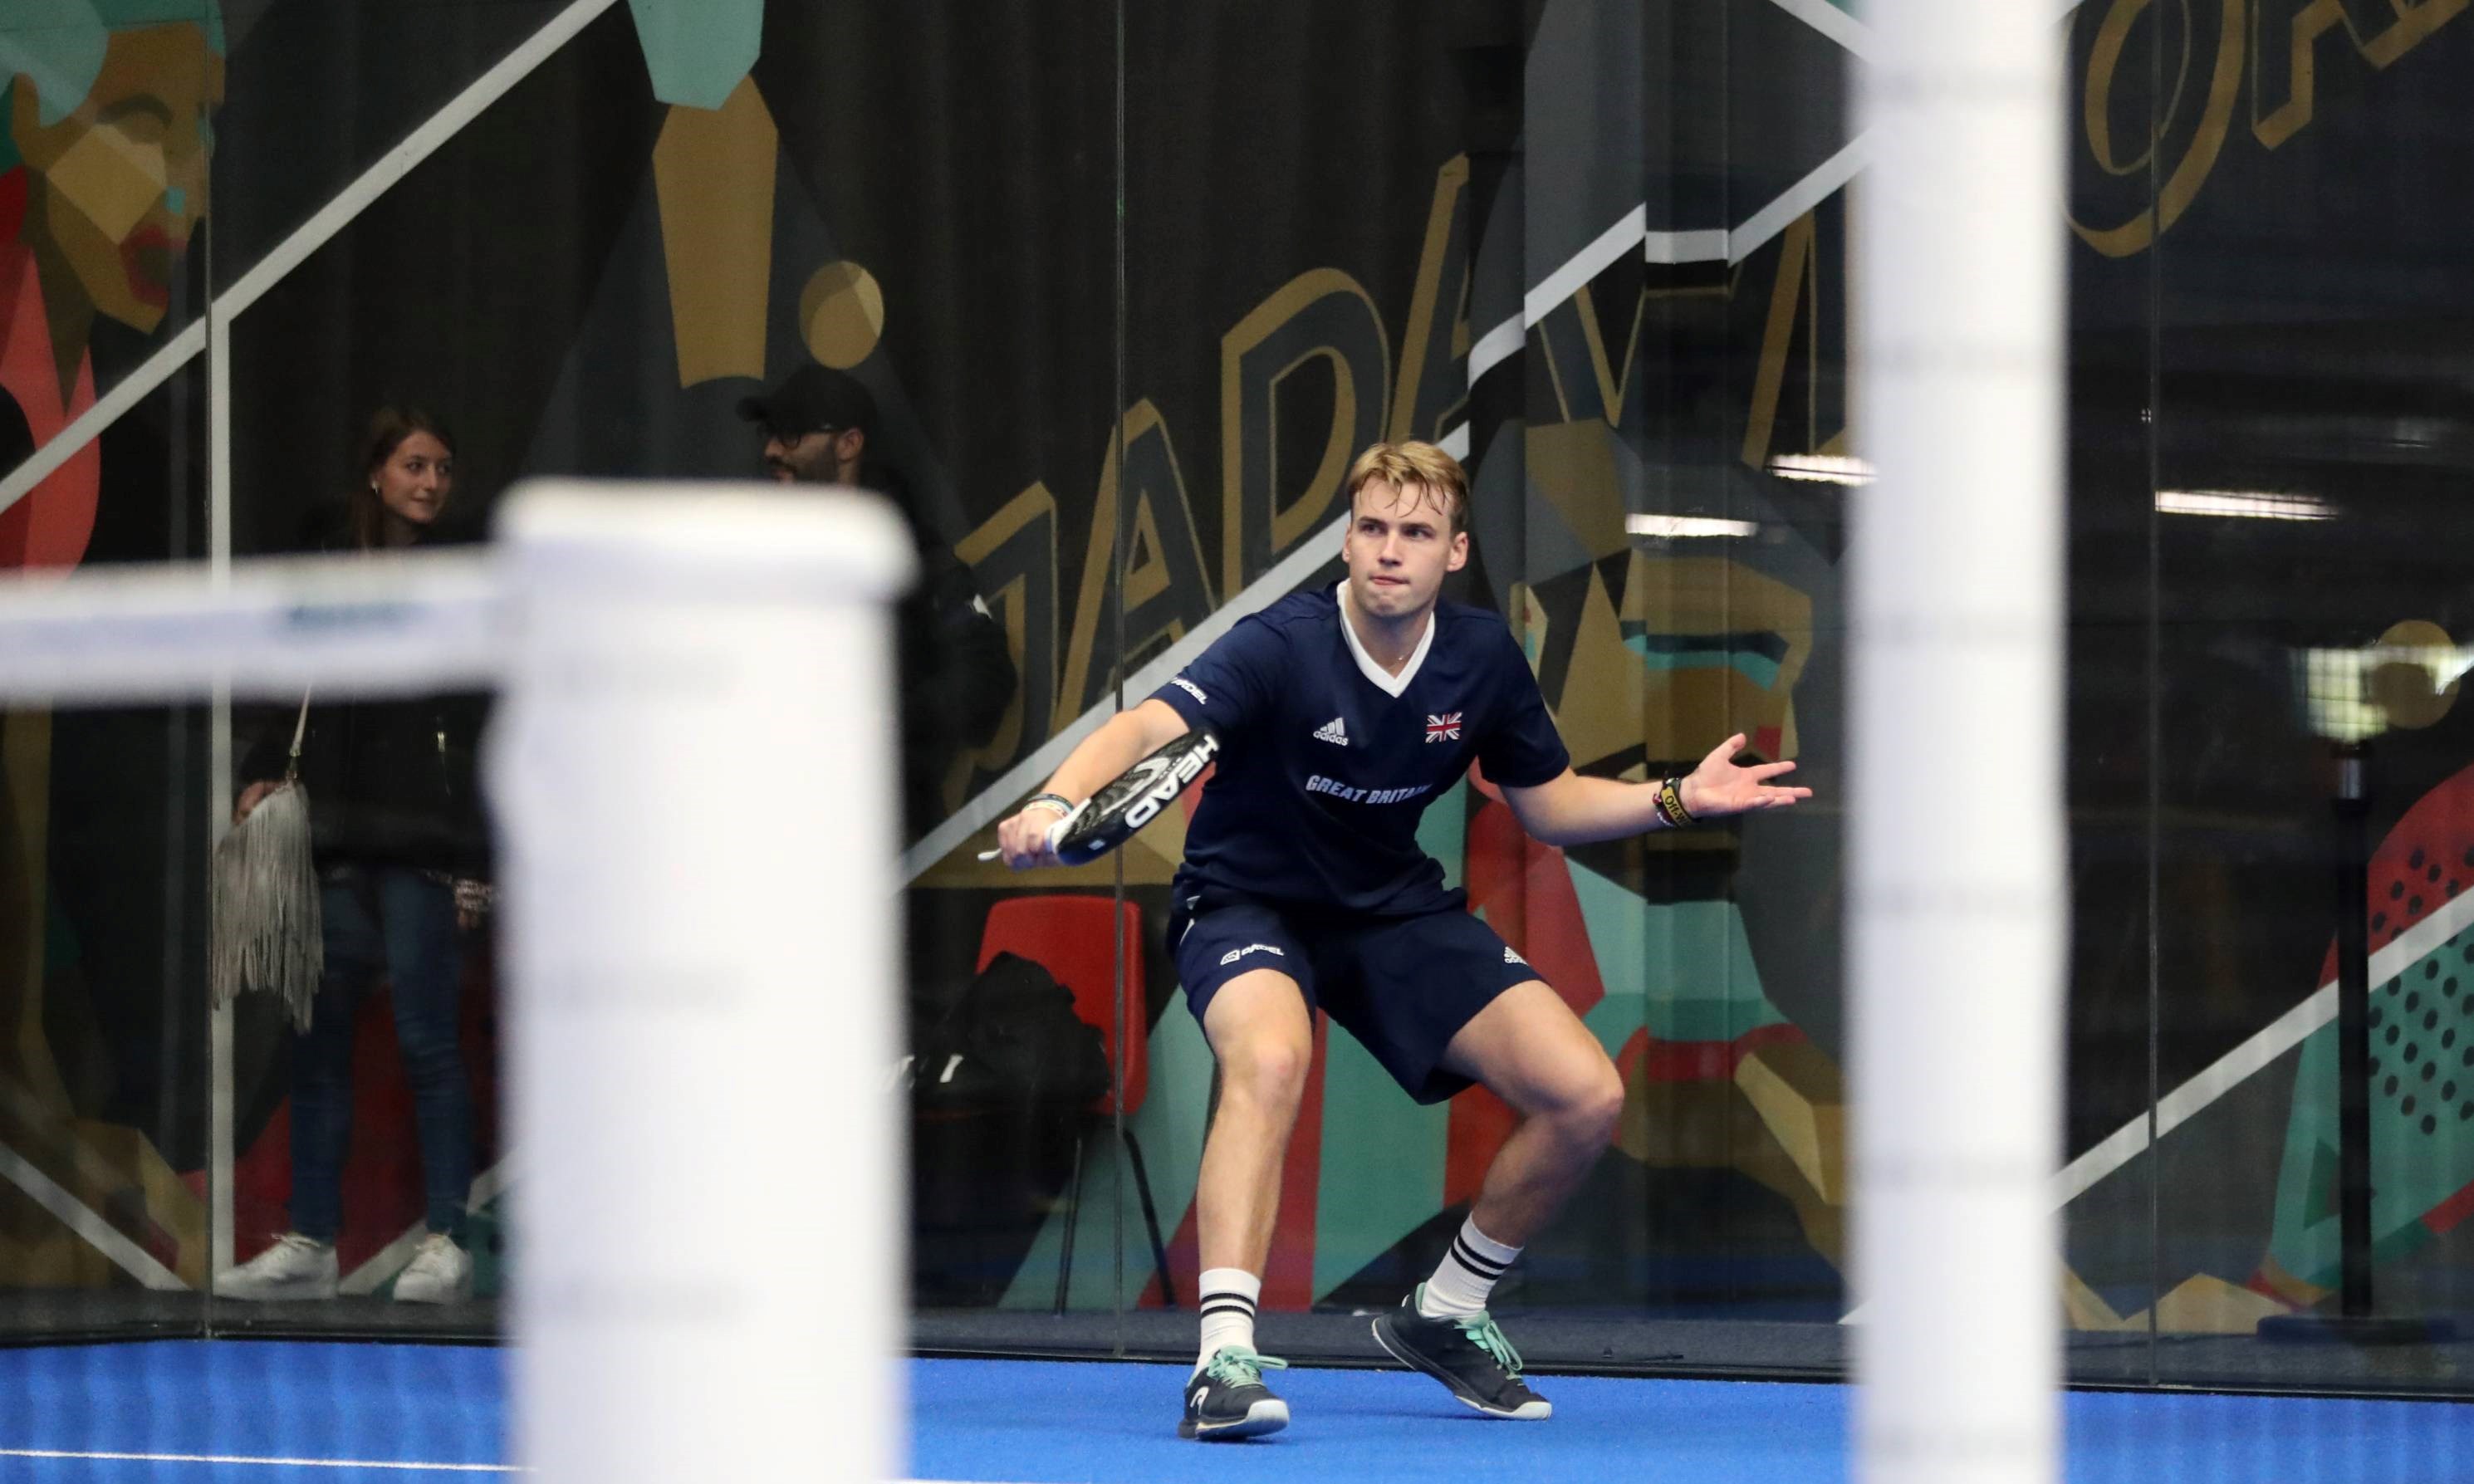 Sam Jones lines up a backhand at the World Padel Championships qualifiers